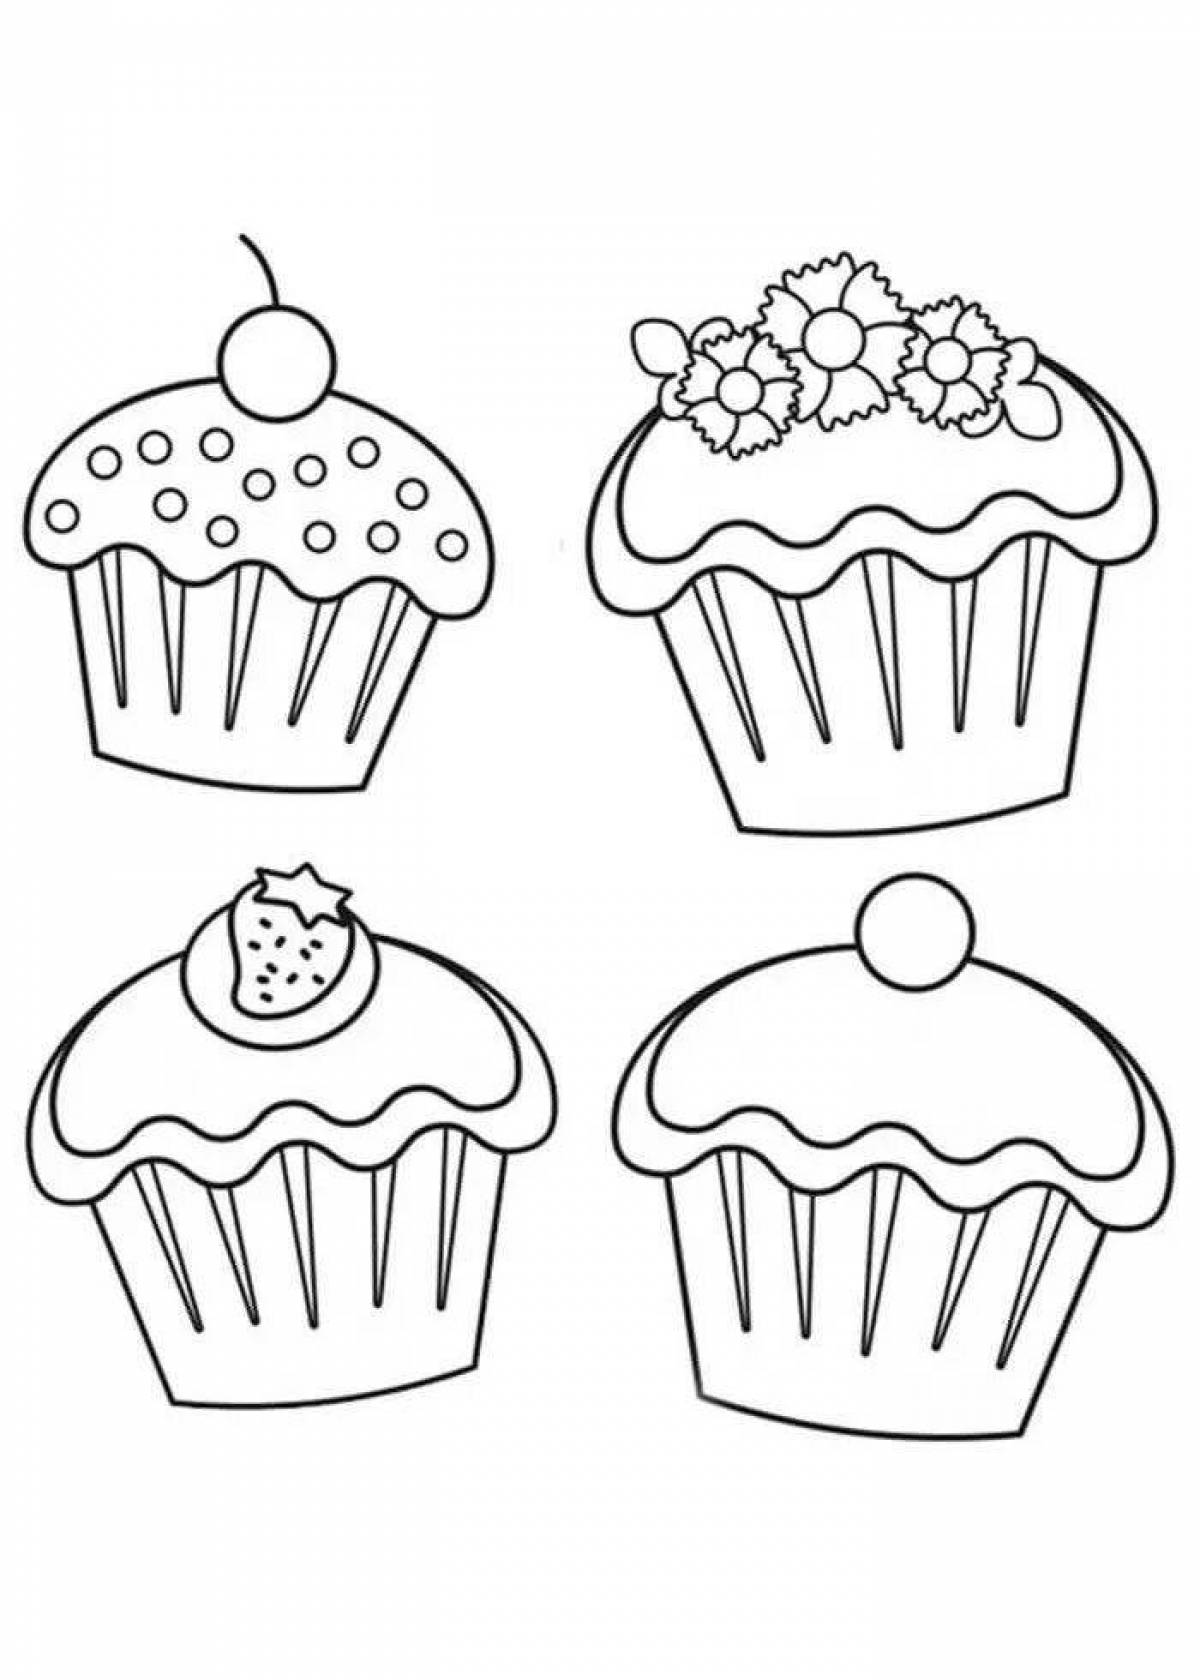 Appetizing cake coloring